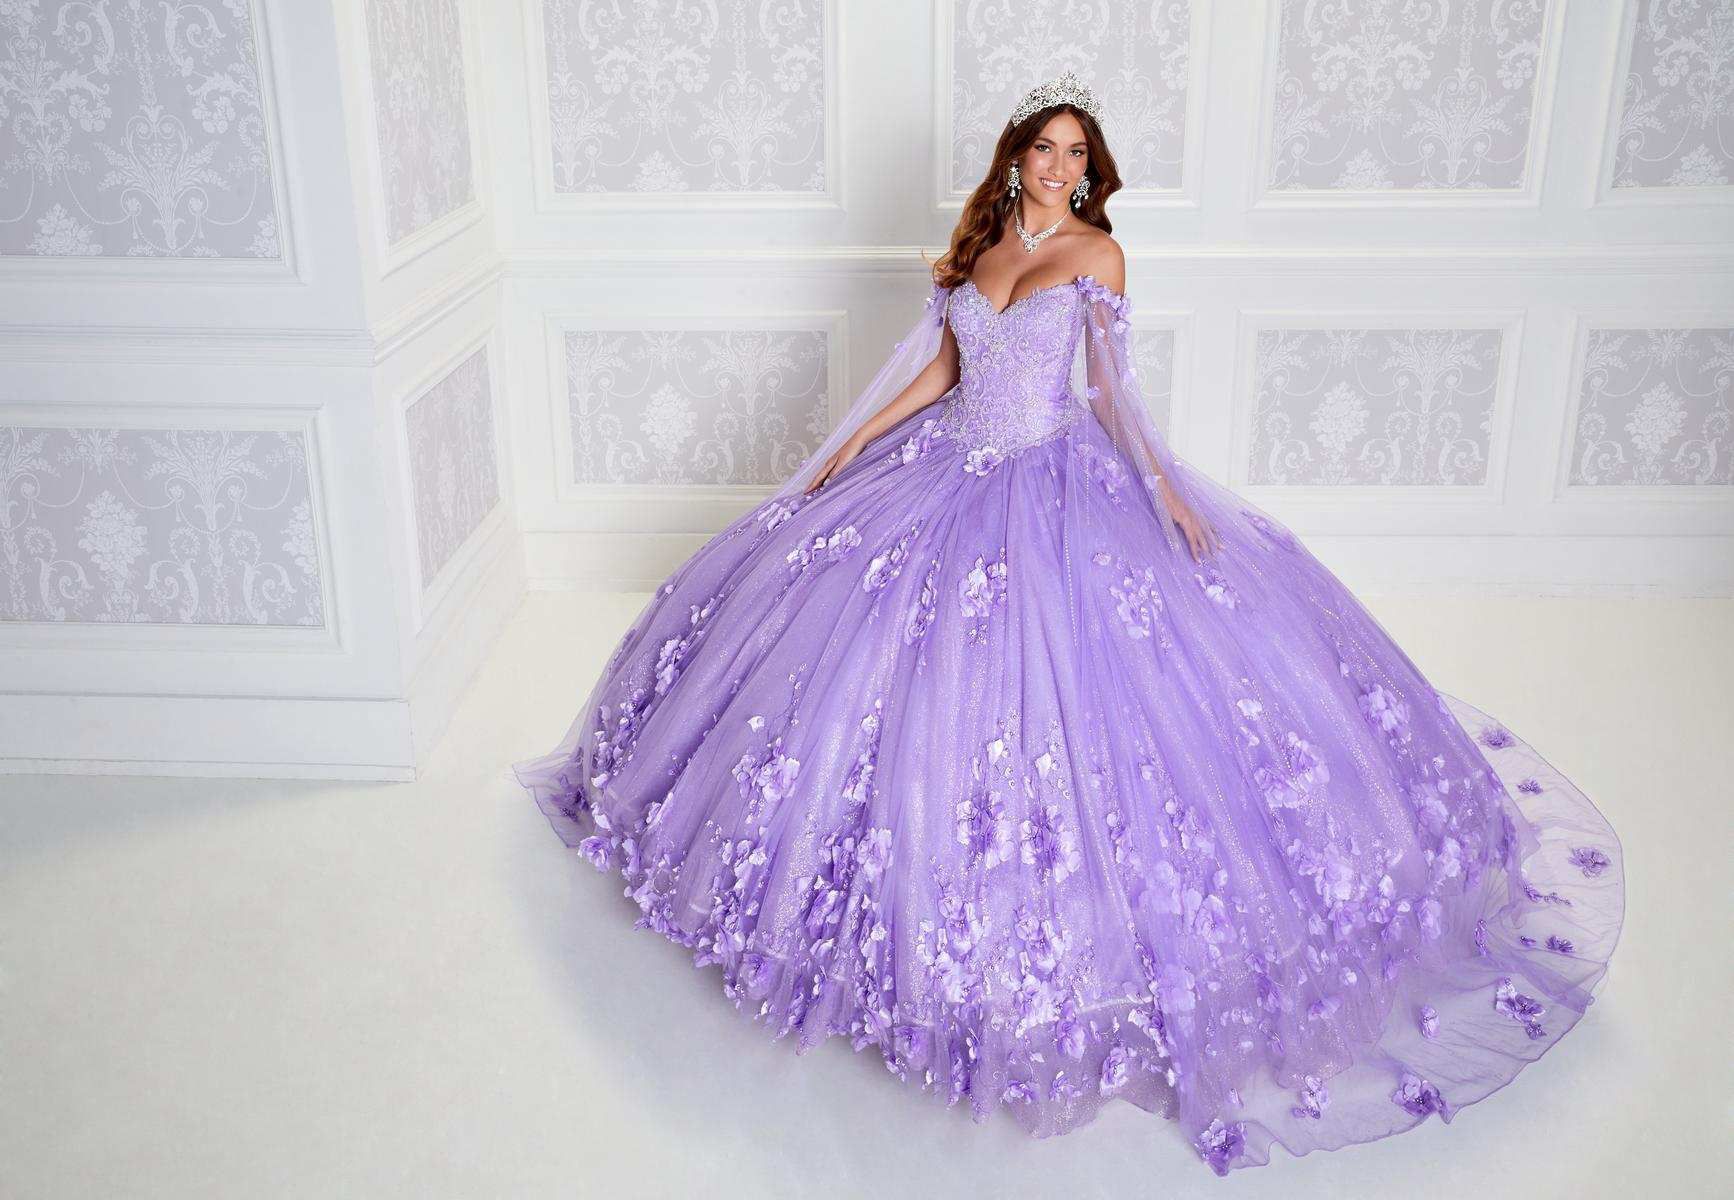 Quinceanera Dress Lilac Size 2